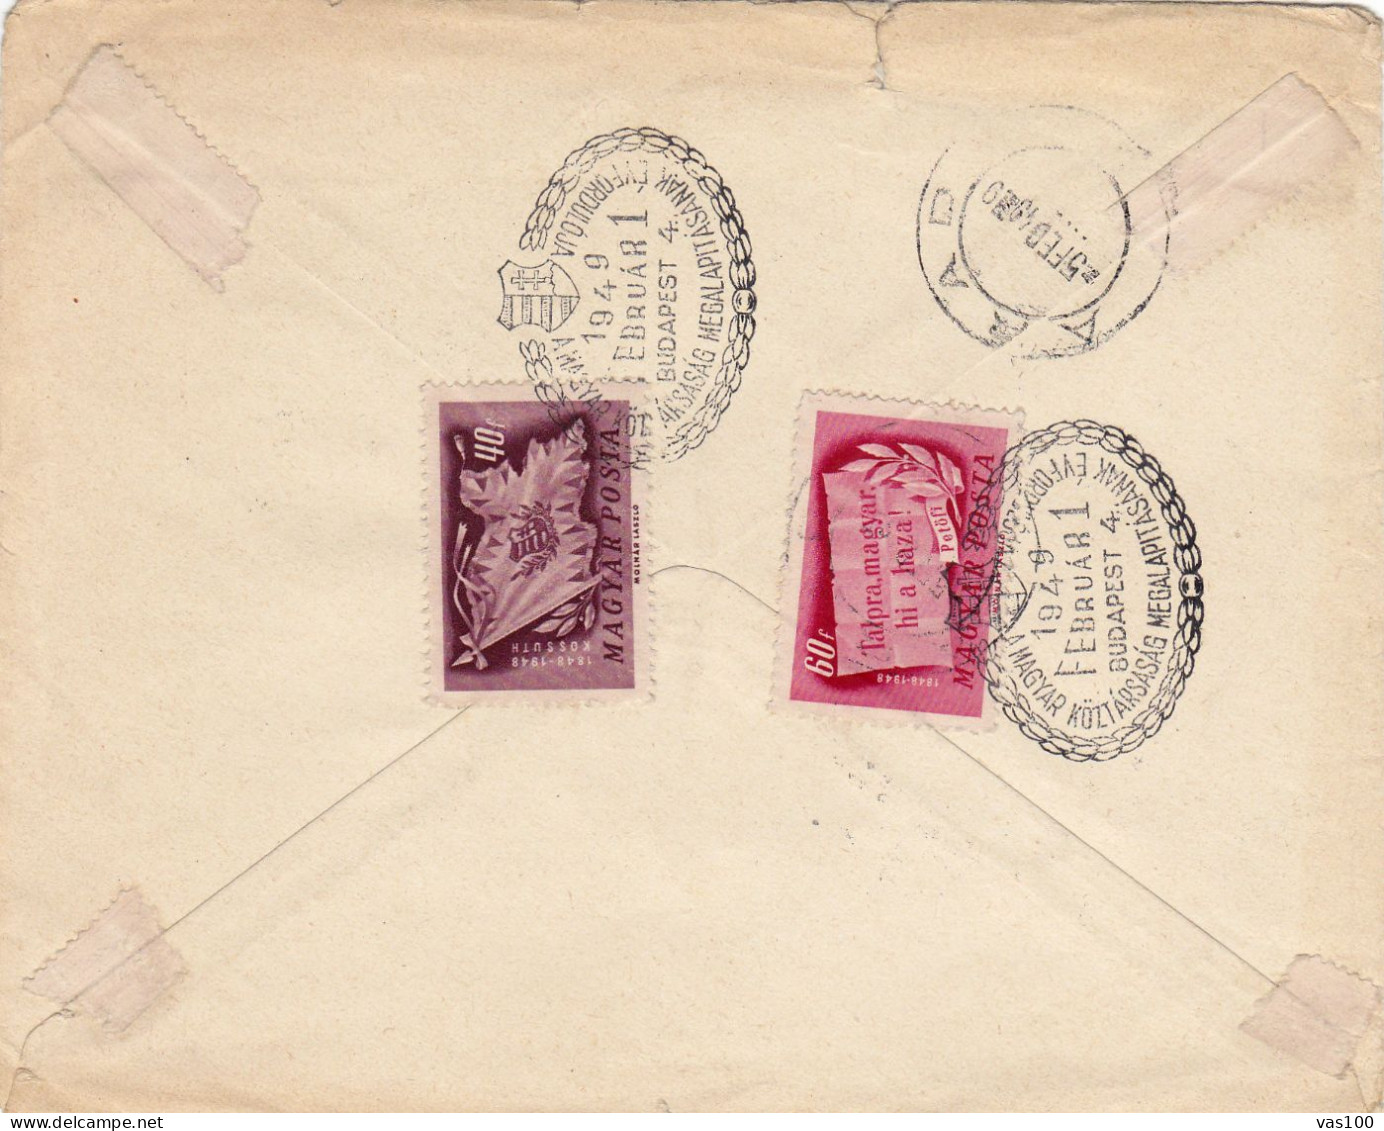 HISTORICAL DOCUMENTS  REGISTERED   COVERS  NICE FRANKING  1949  HUNGARY - Briefe U. Dokumente